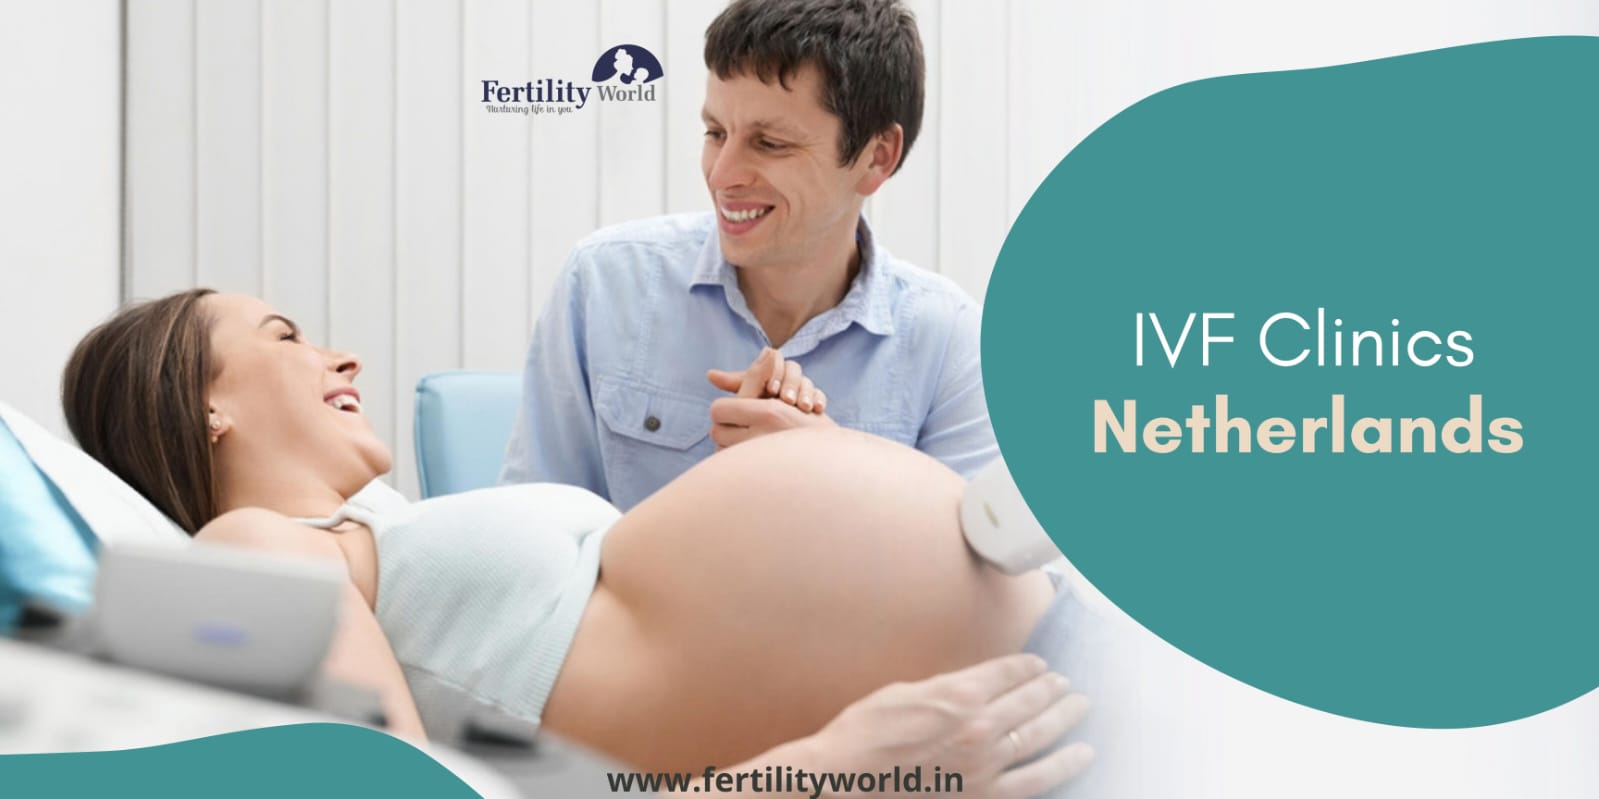 4. Best IVF clinics in the Netherlands